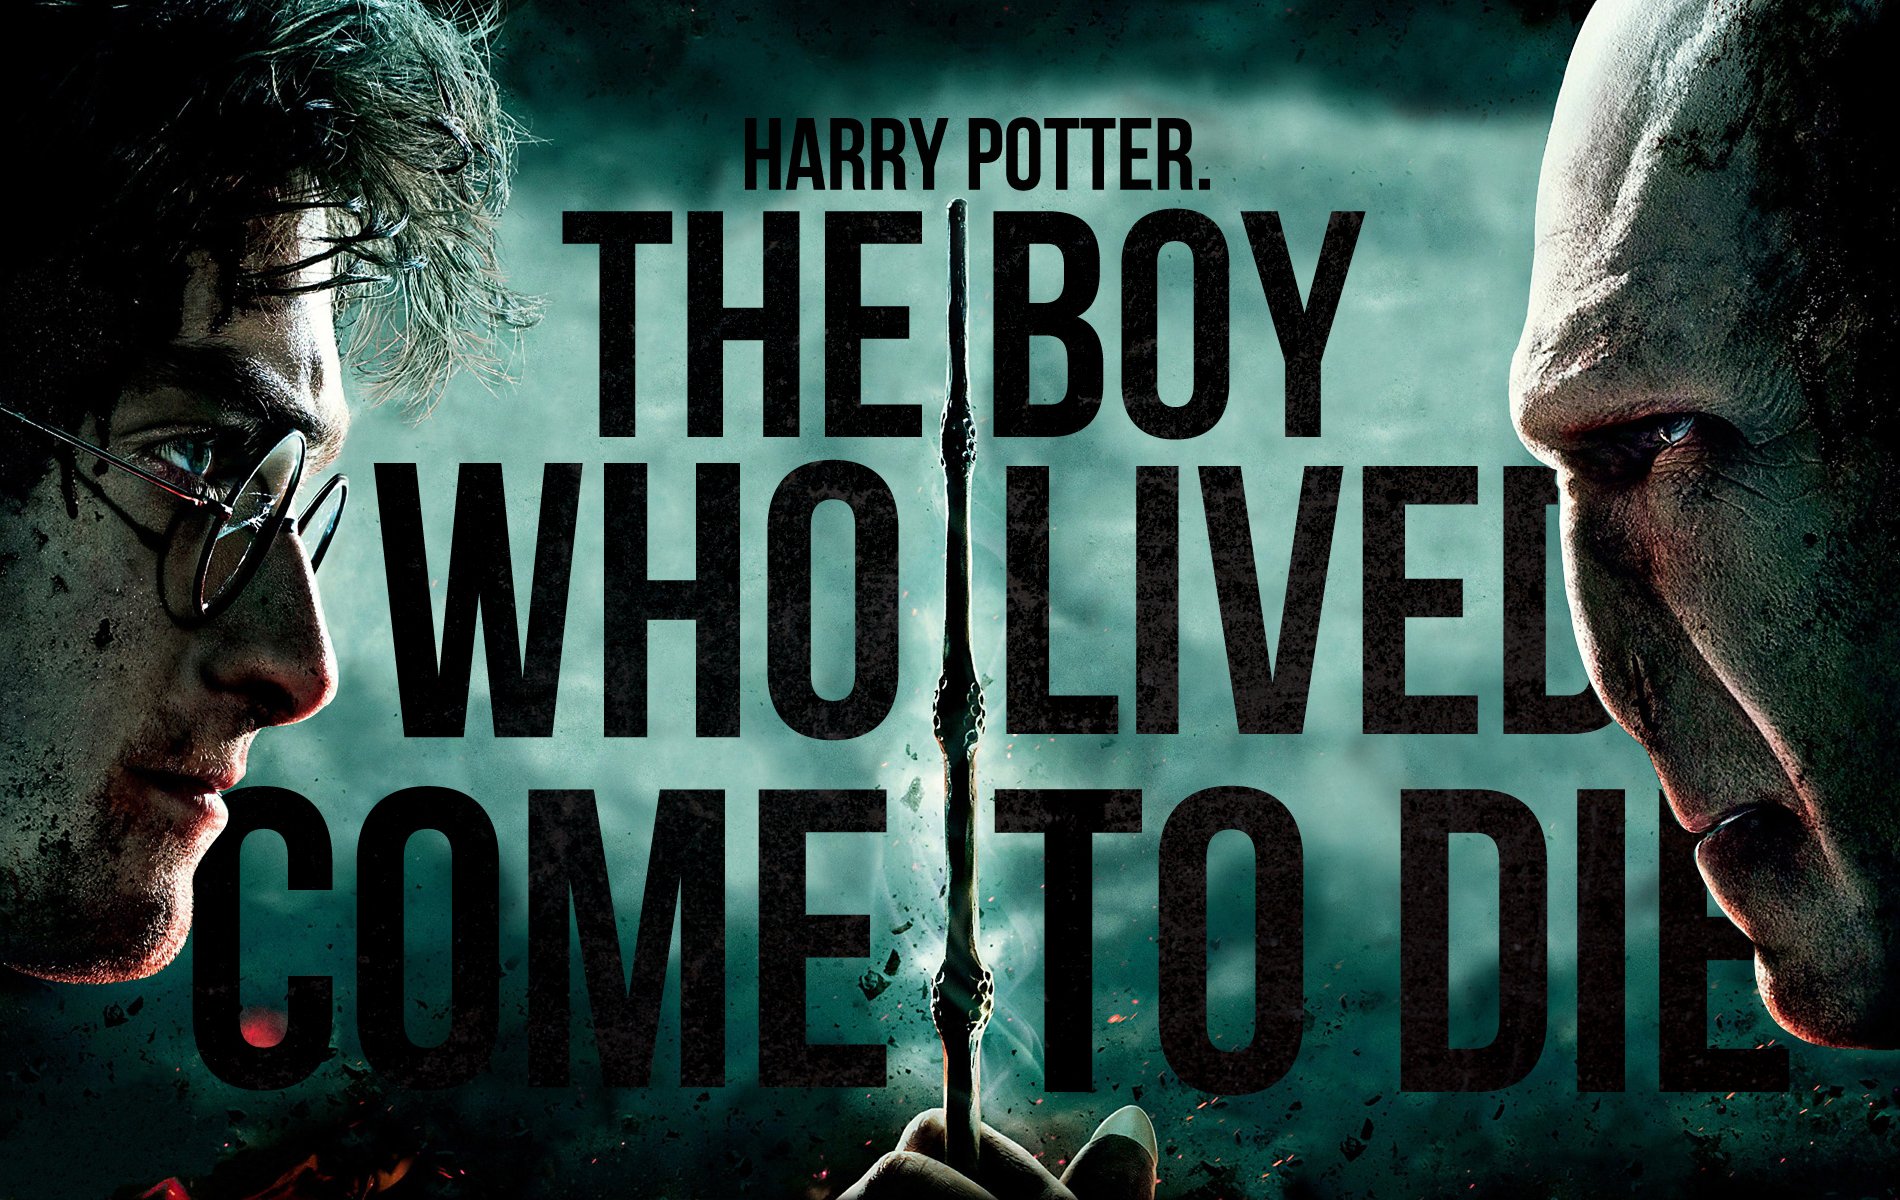 Harry Potter And The Deathly Hallows Part 2 Computer Wallpapers